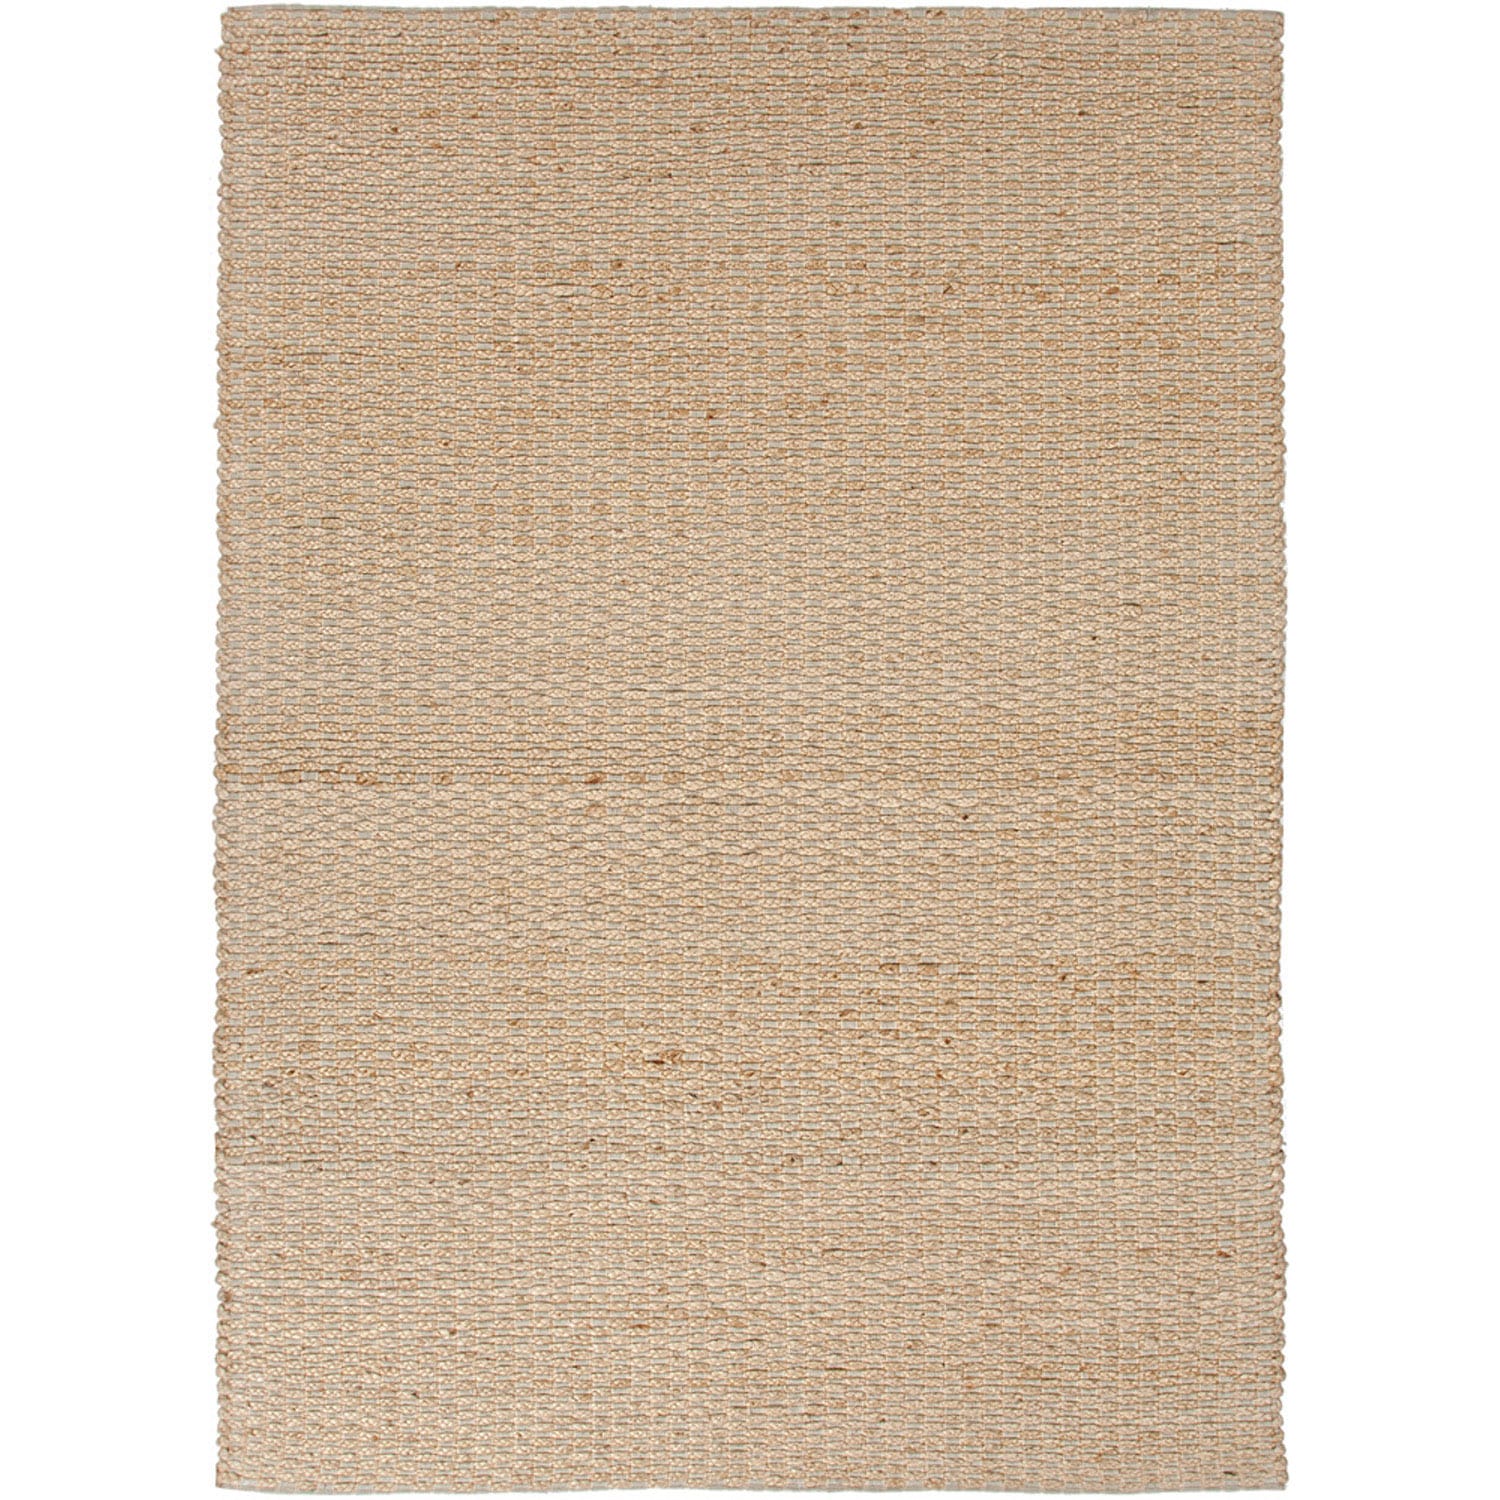 Handmade Naturals Brown Solid pattern Area Rug (8 X 10)